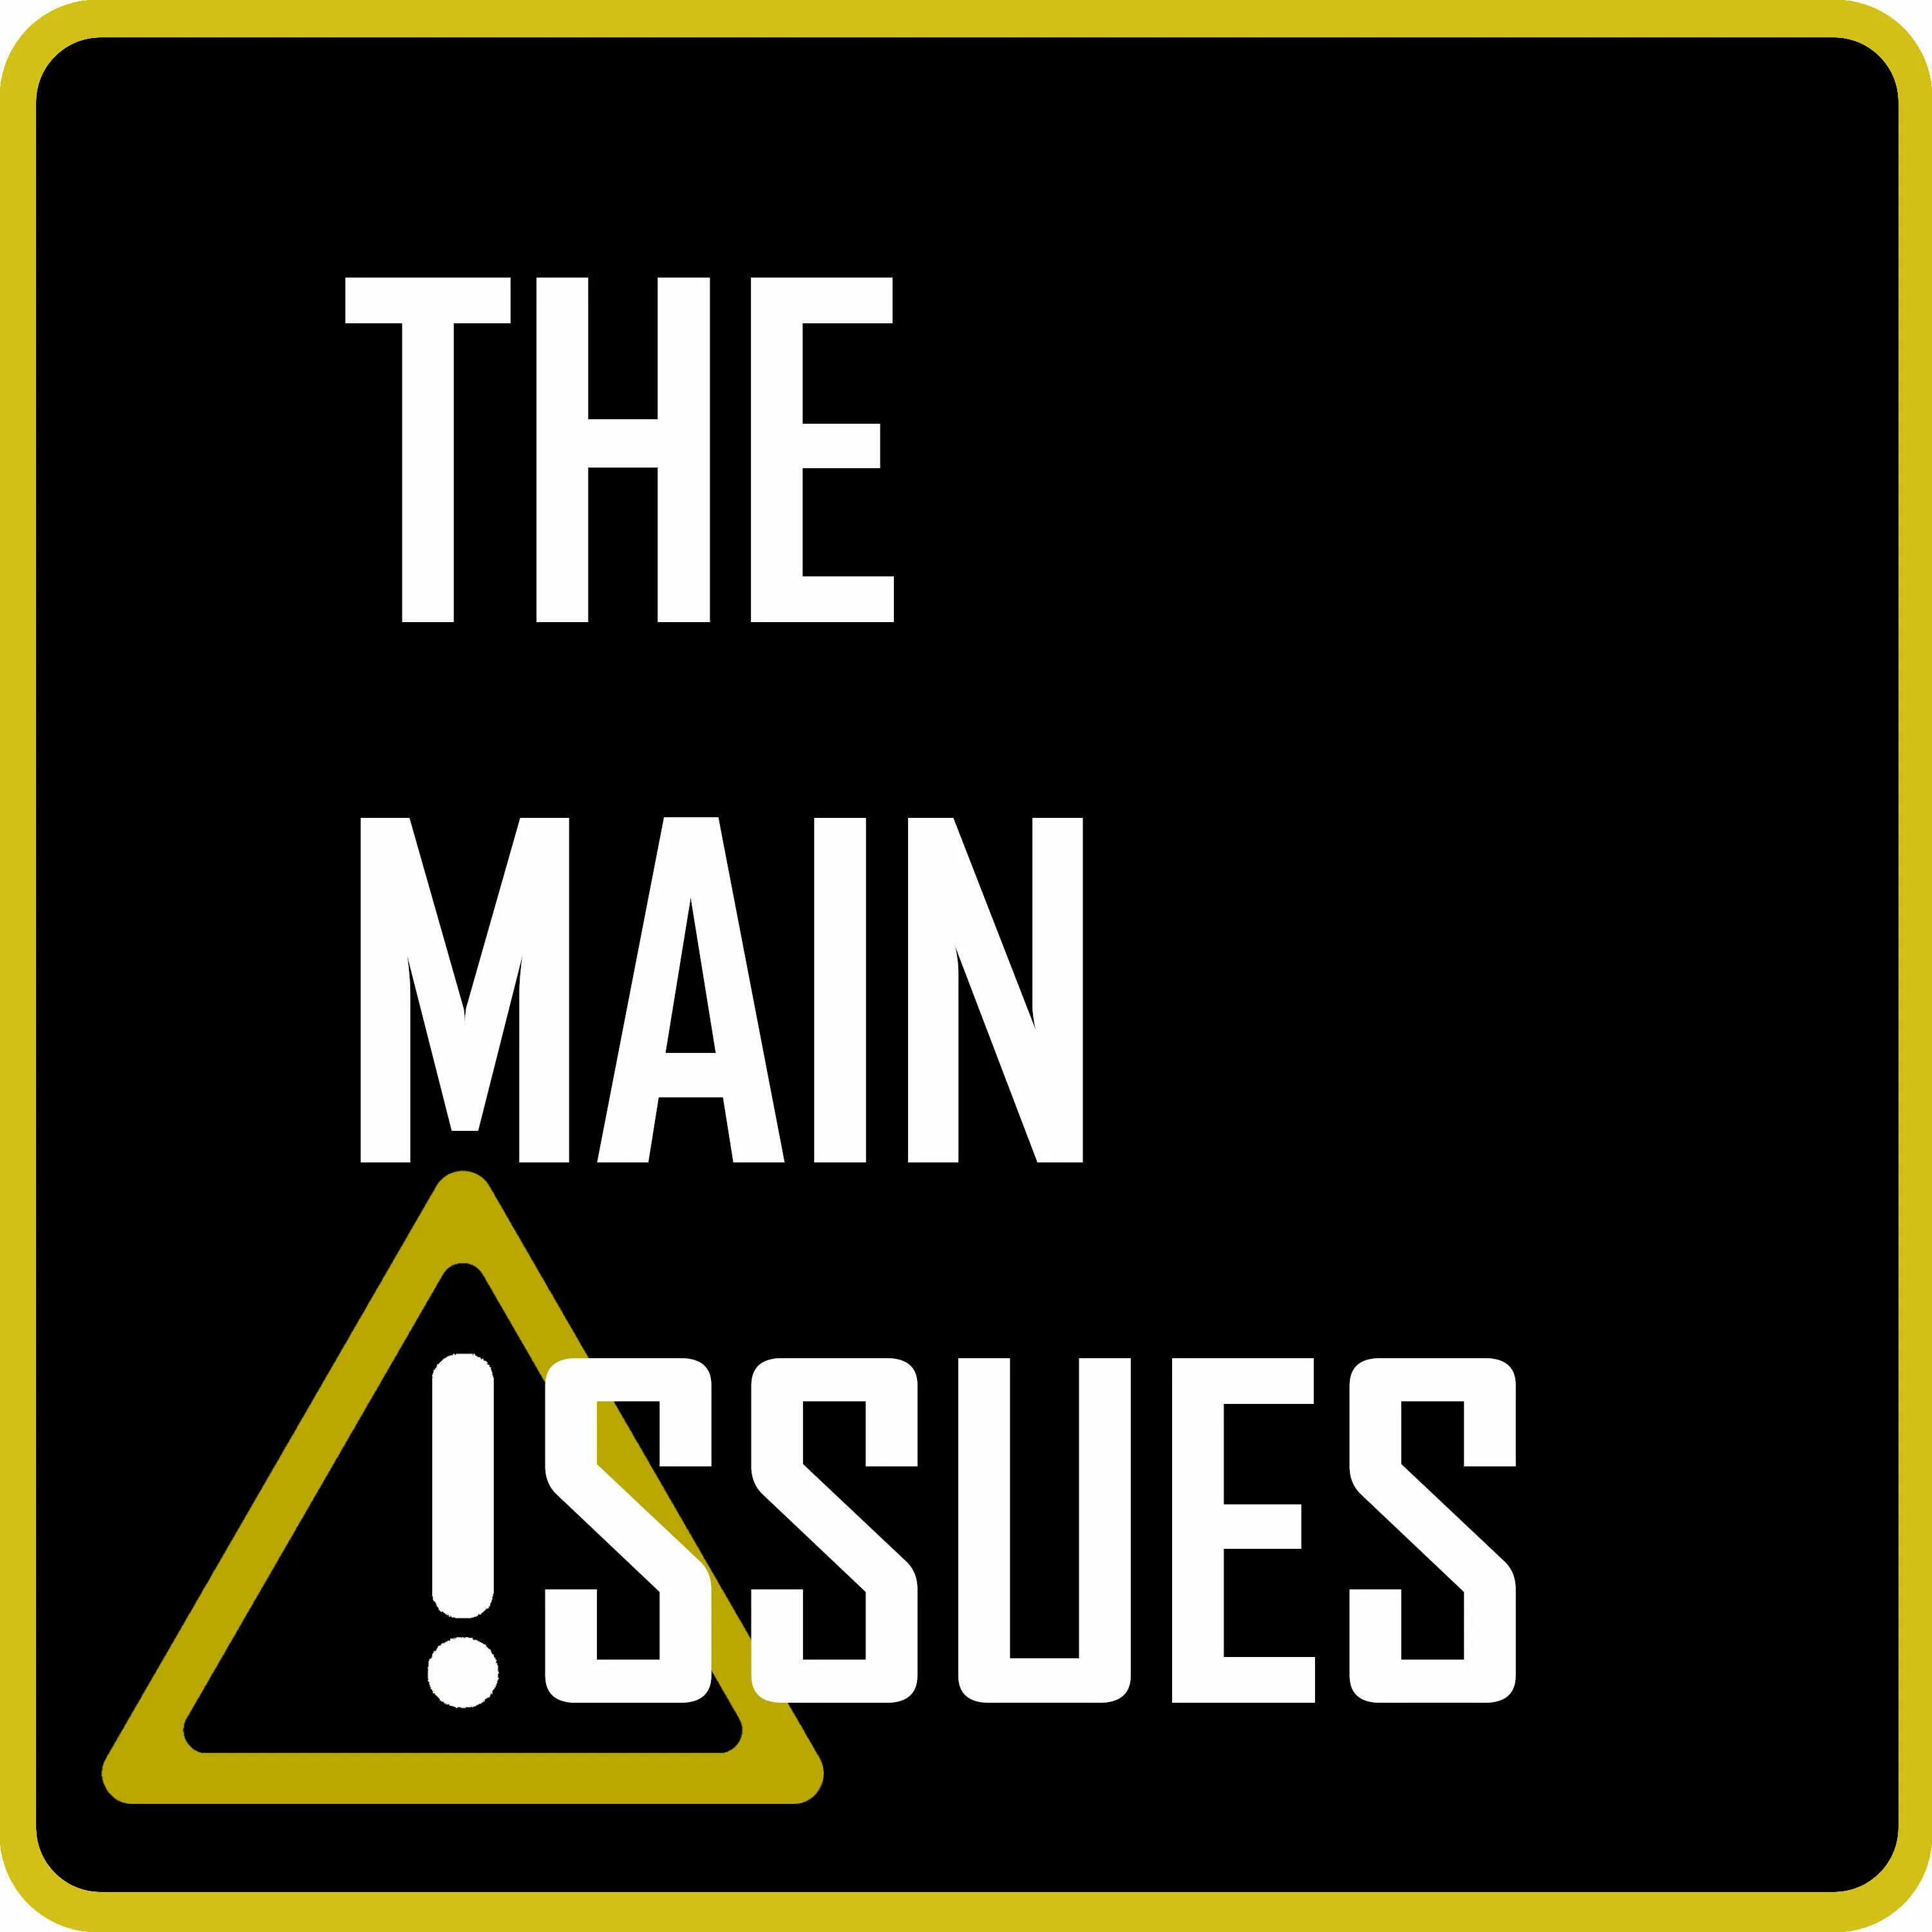 Main Issue. Main Issues картинка. Issue. Main issues